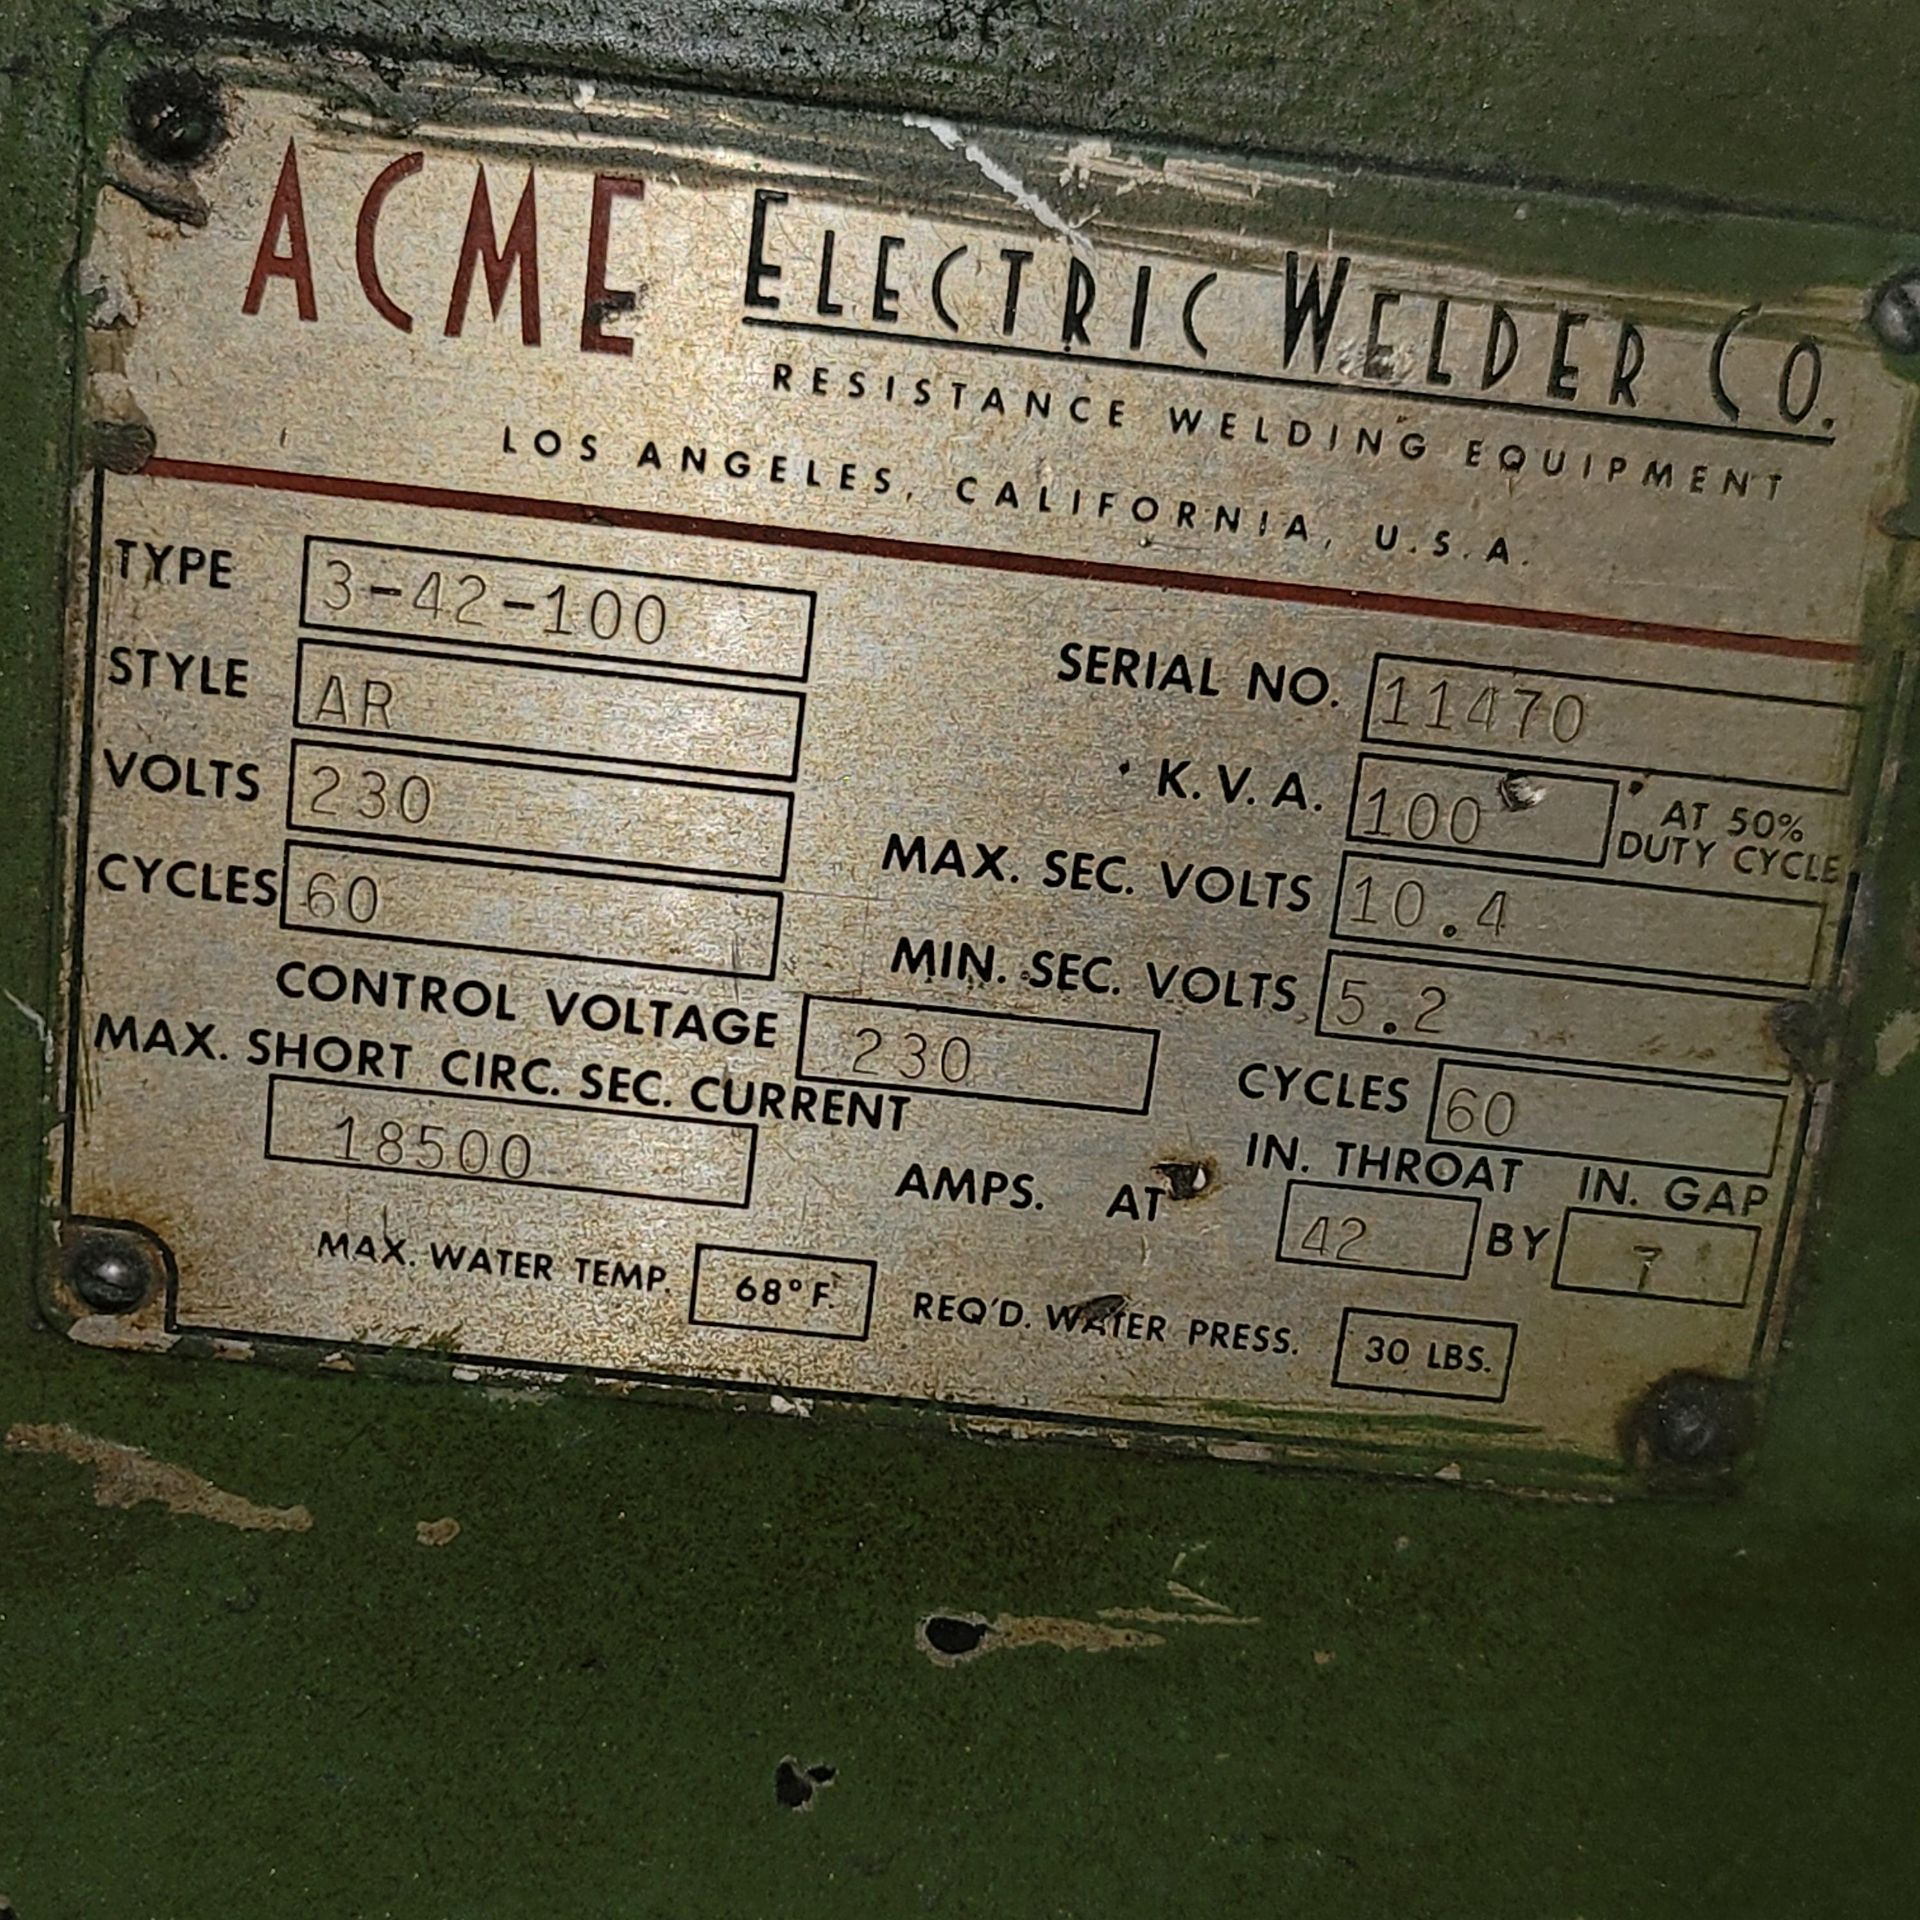 ACME SPOT WELDER, TYPE 3-42-100, STYLE: AR, 100 KVA, 230 VOLTS, 42" THROAT, S/N 11470 - Image 6 of 6